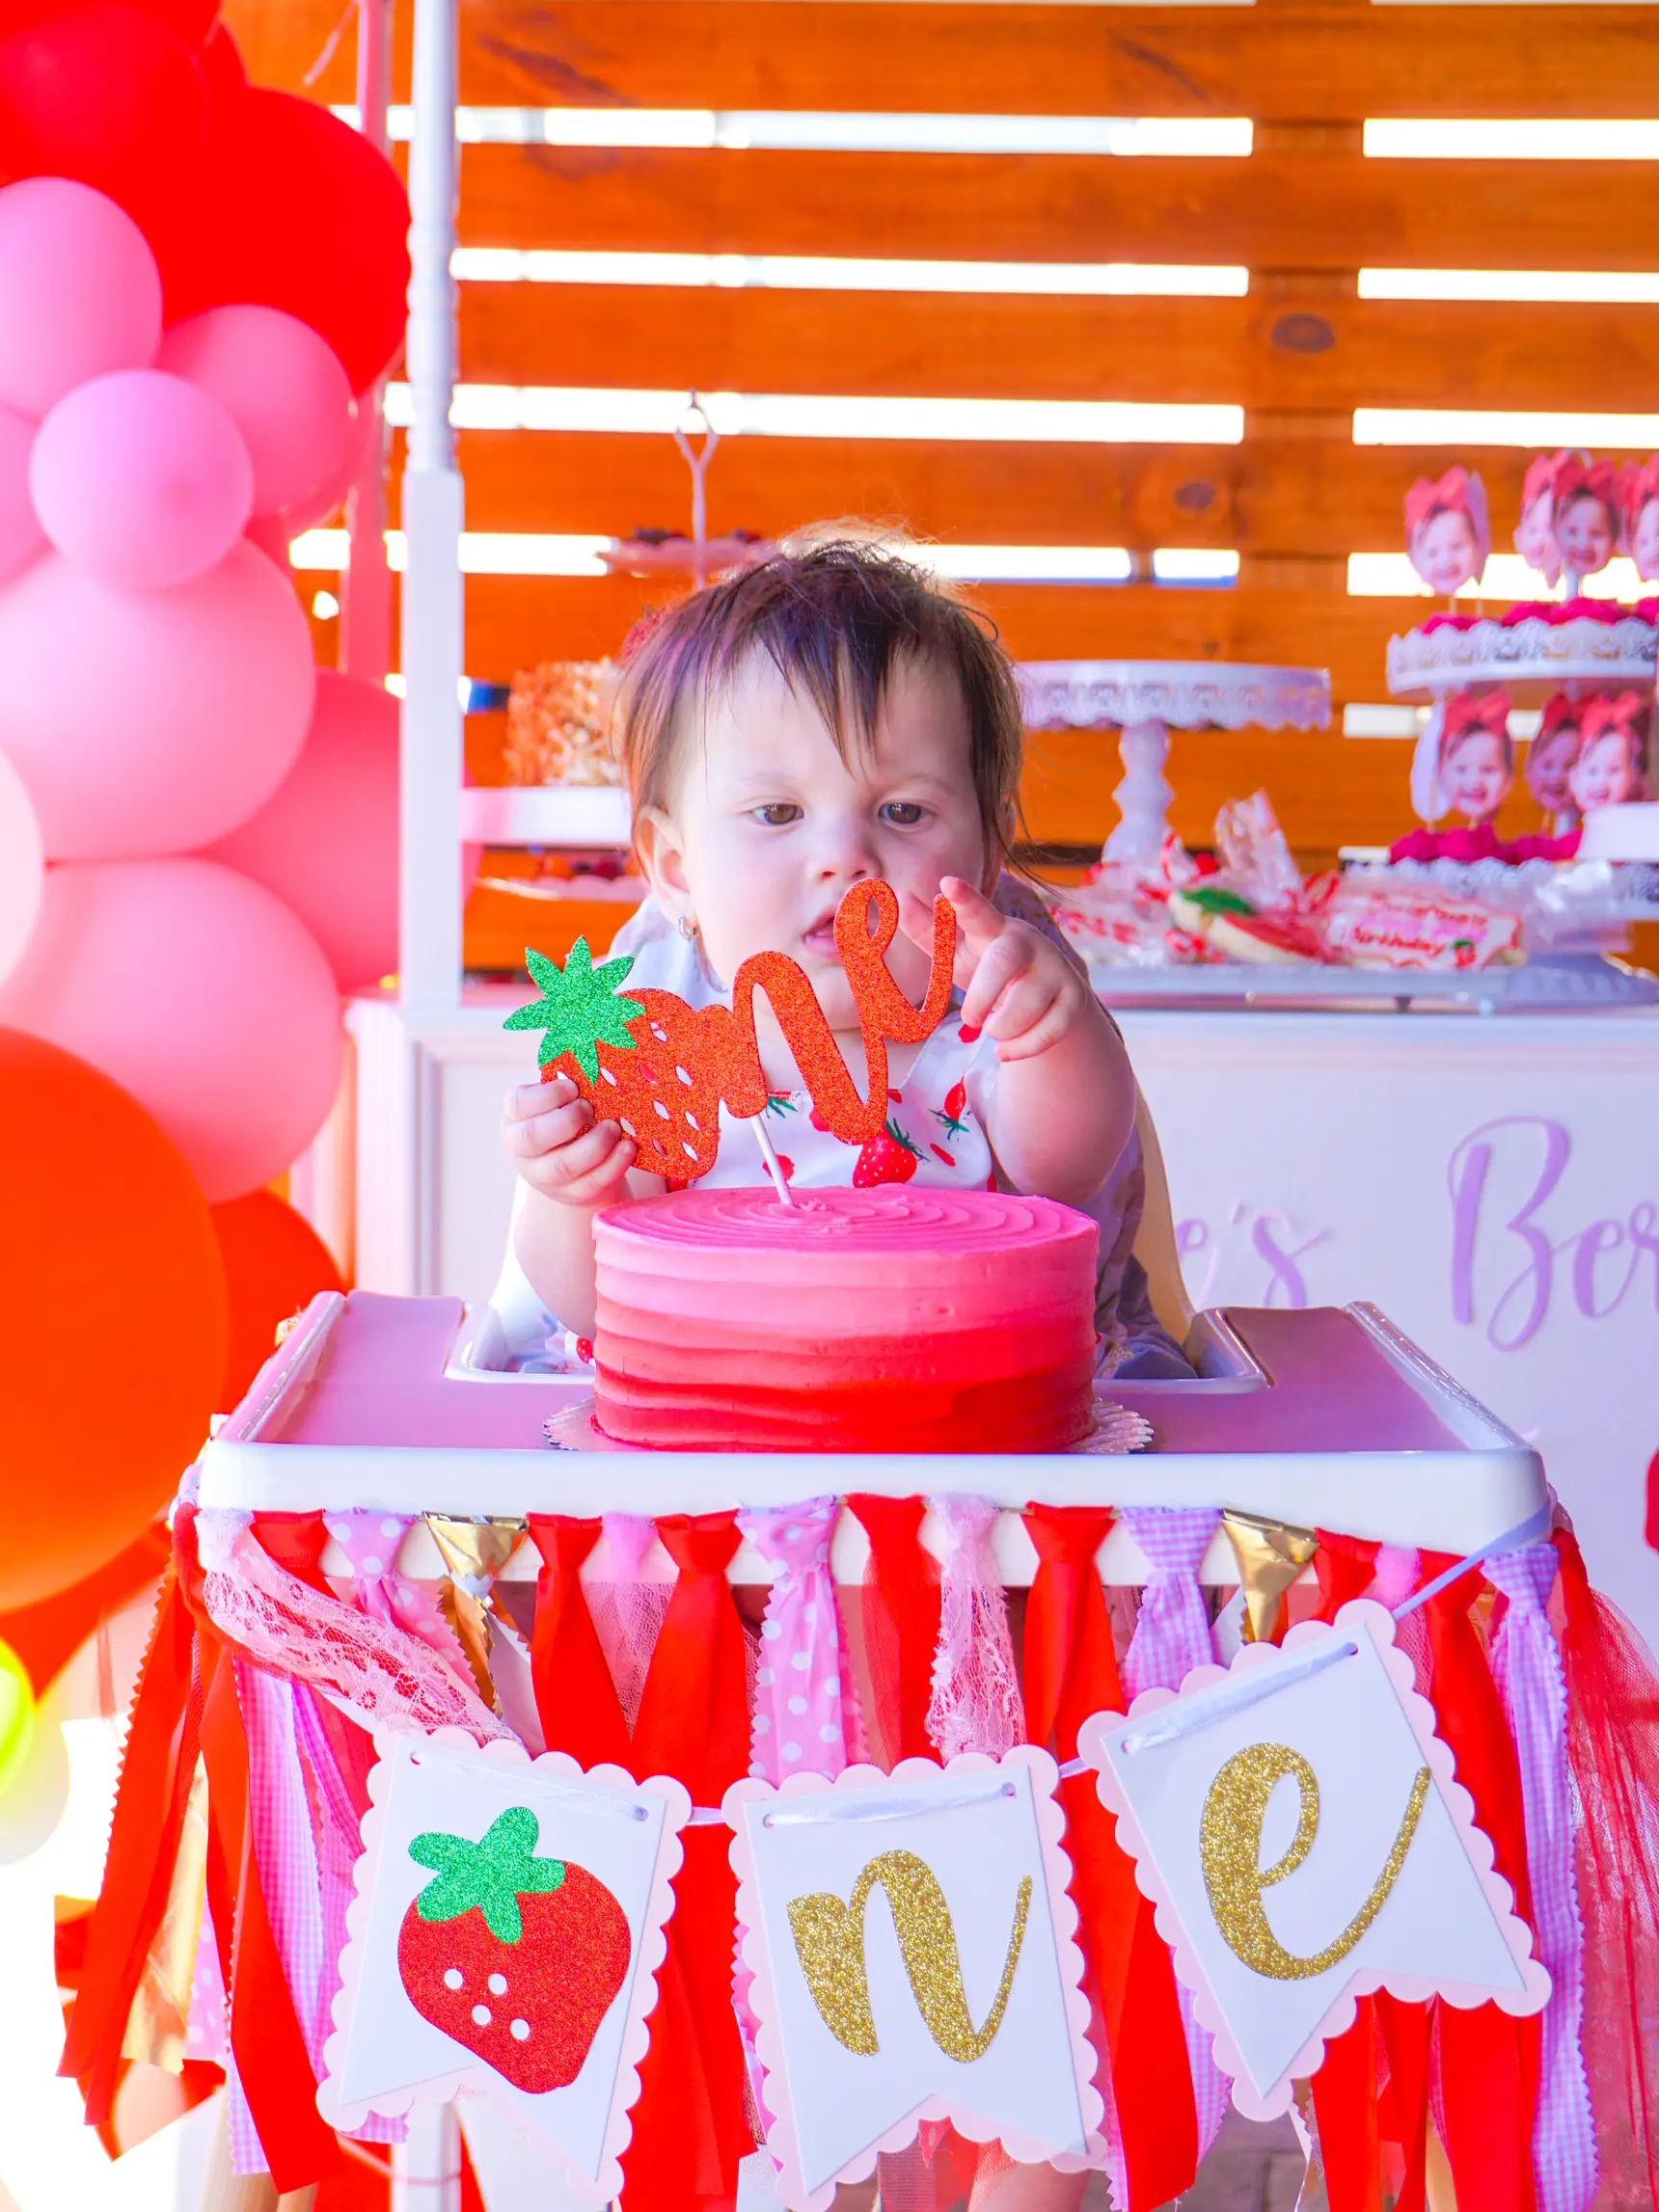 Blake's Berry First Birthday Party • BrightonTheDay